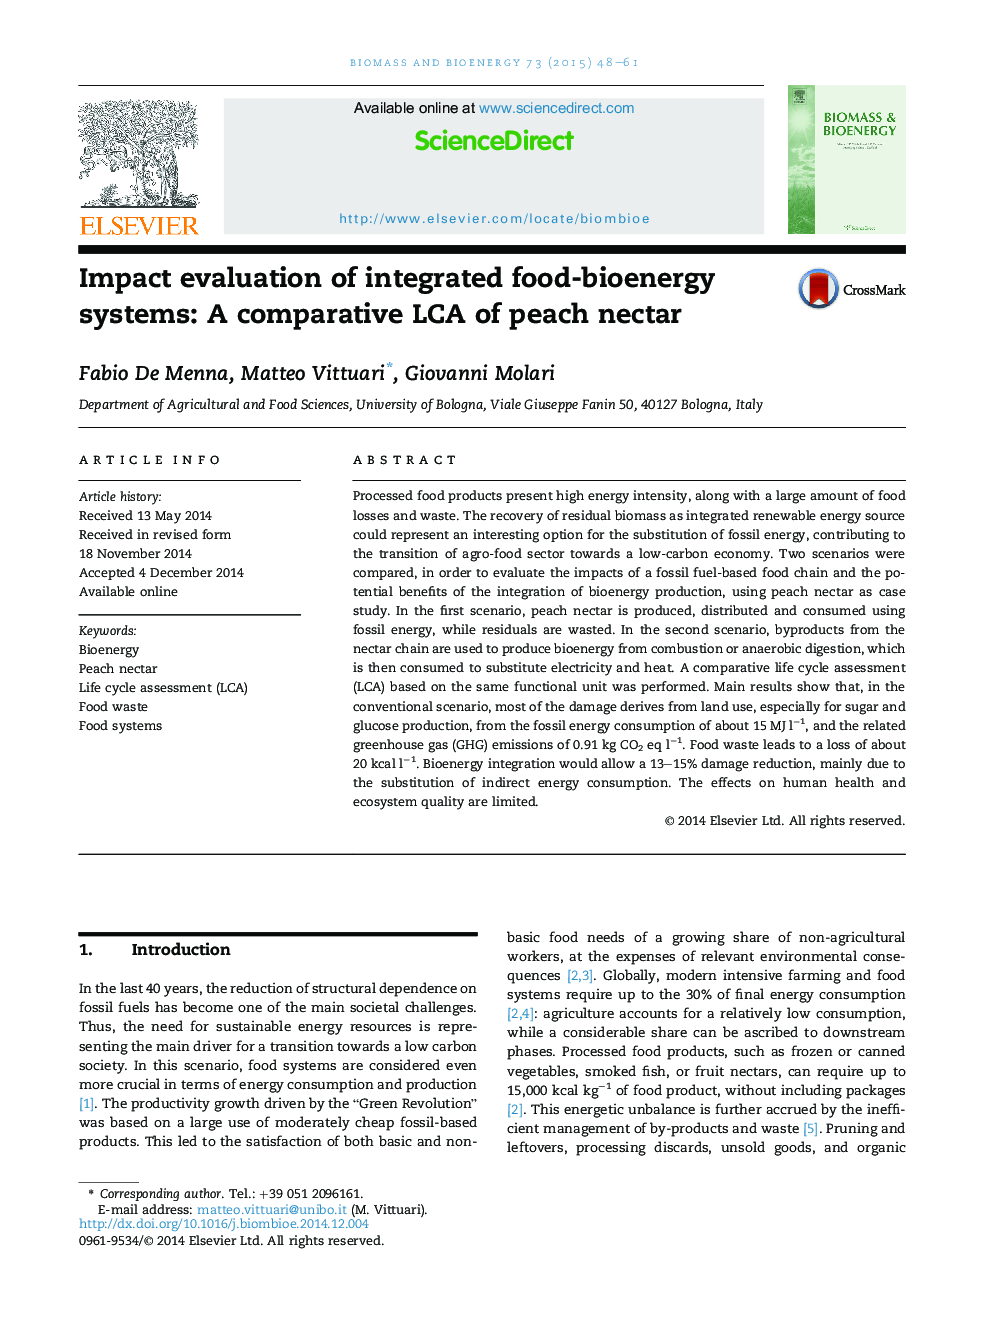 Impact evaluation of integrated food-bioenergy systems: A comparative LCA of peach nectar